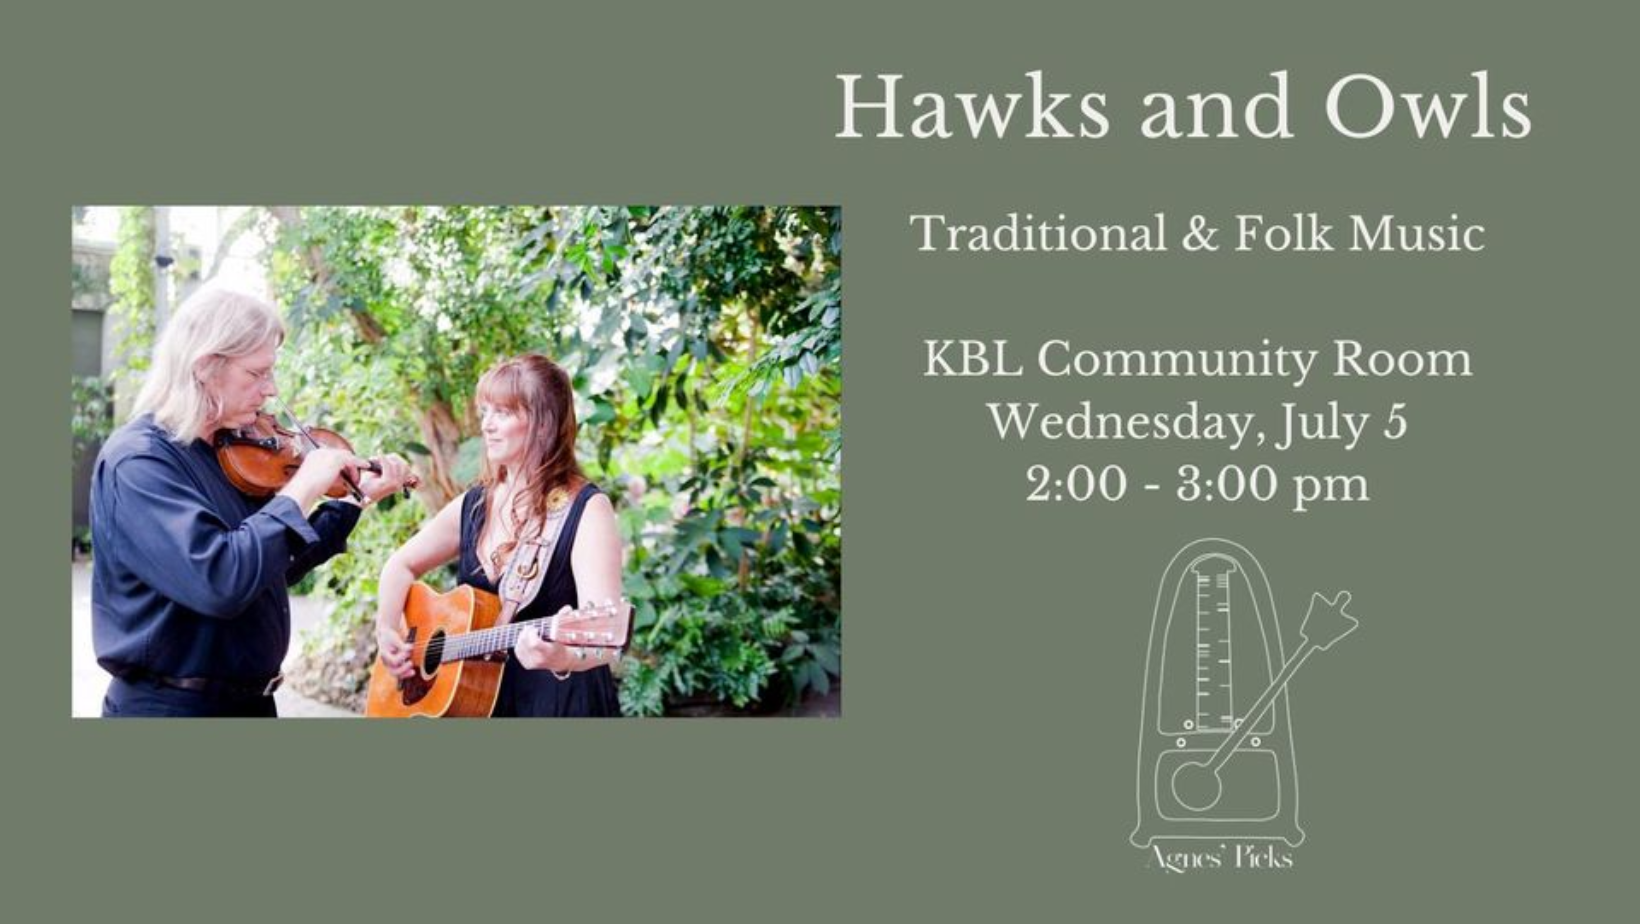 Image of two people playing a fiddle and a guitar. Text reads "Hawks & Owls String Band".